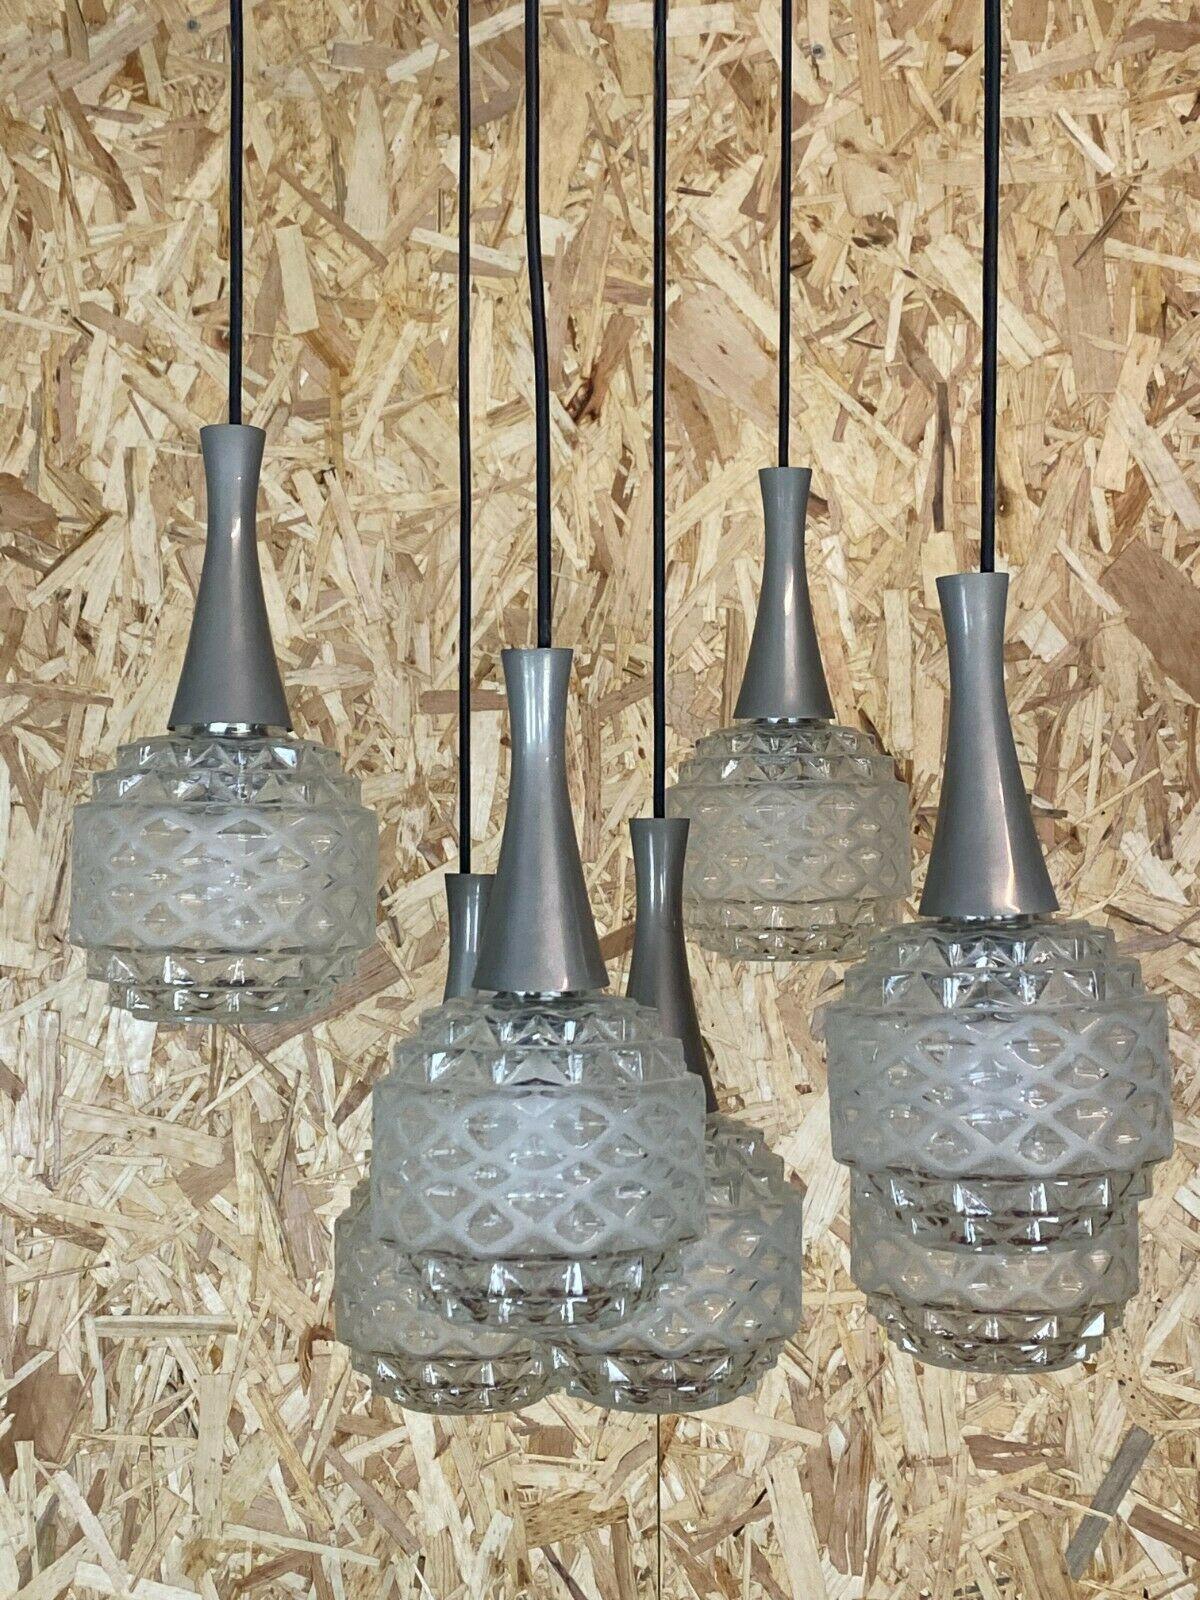 60s 70s ceiling light hanging lamp cascade lamp glass Space Age Design 70s

Object: cascade lamp

Manufacturer:

Condition: good

Age: around 1960-1970

Dimensions:

Diameter = 47cm
Height = 90cm

Other notes:

The pictures serve as